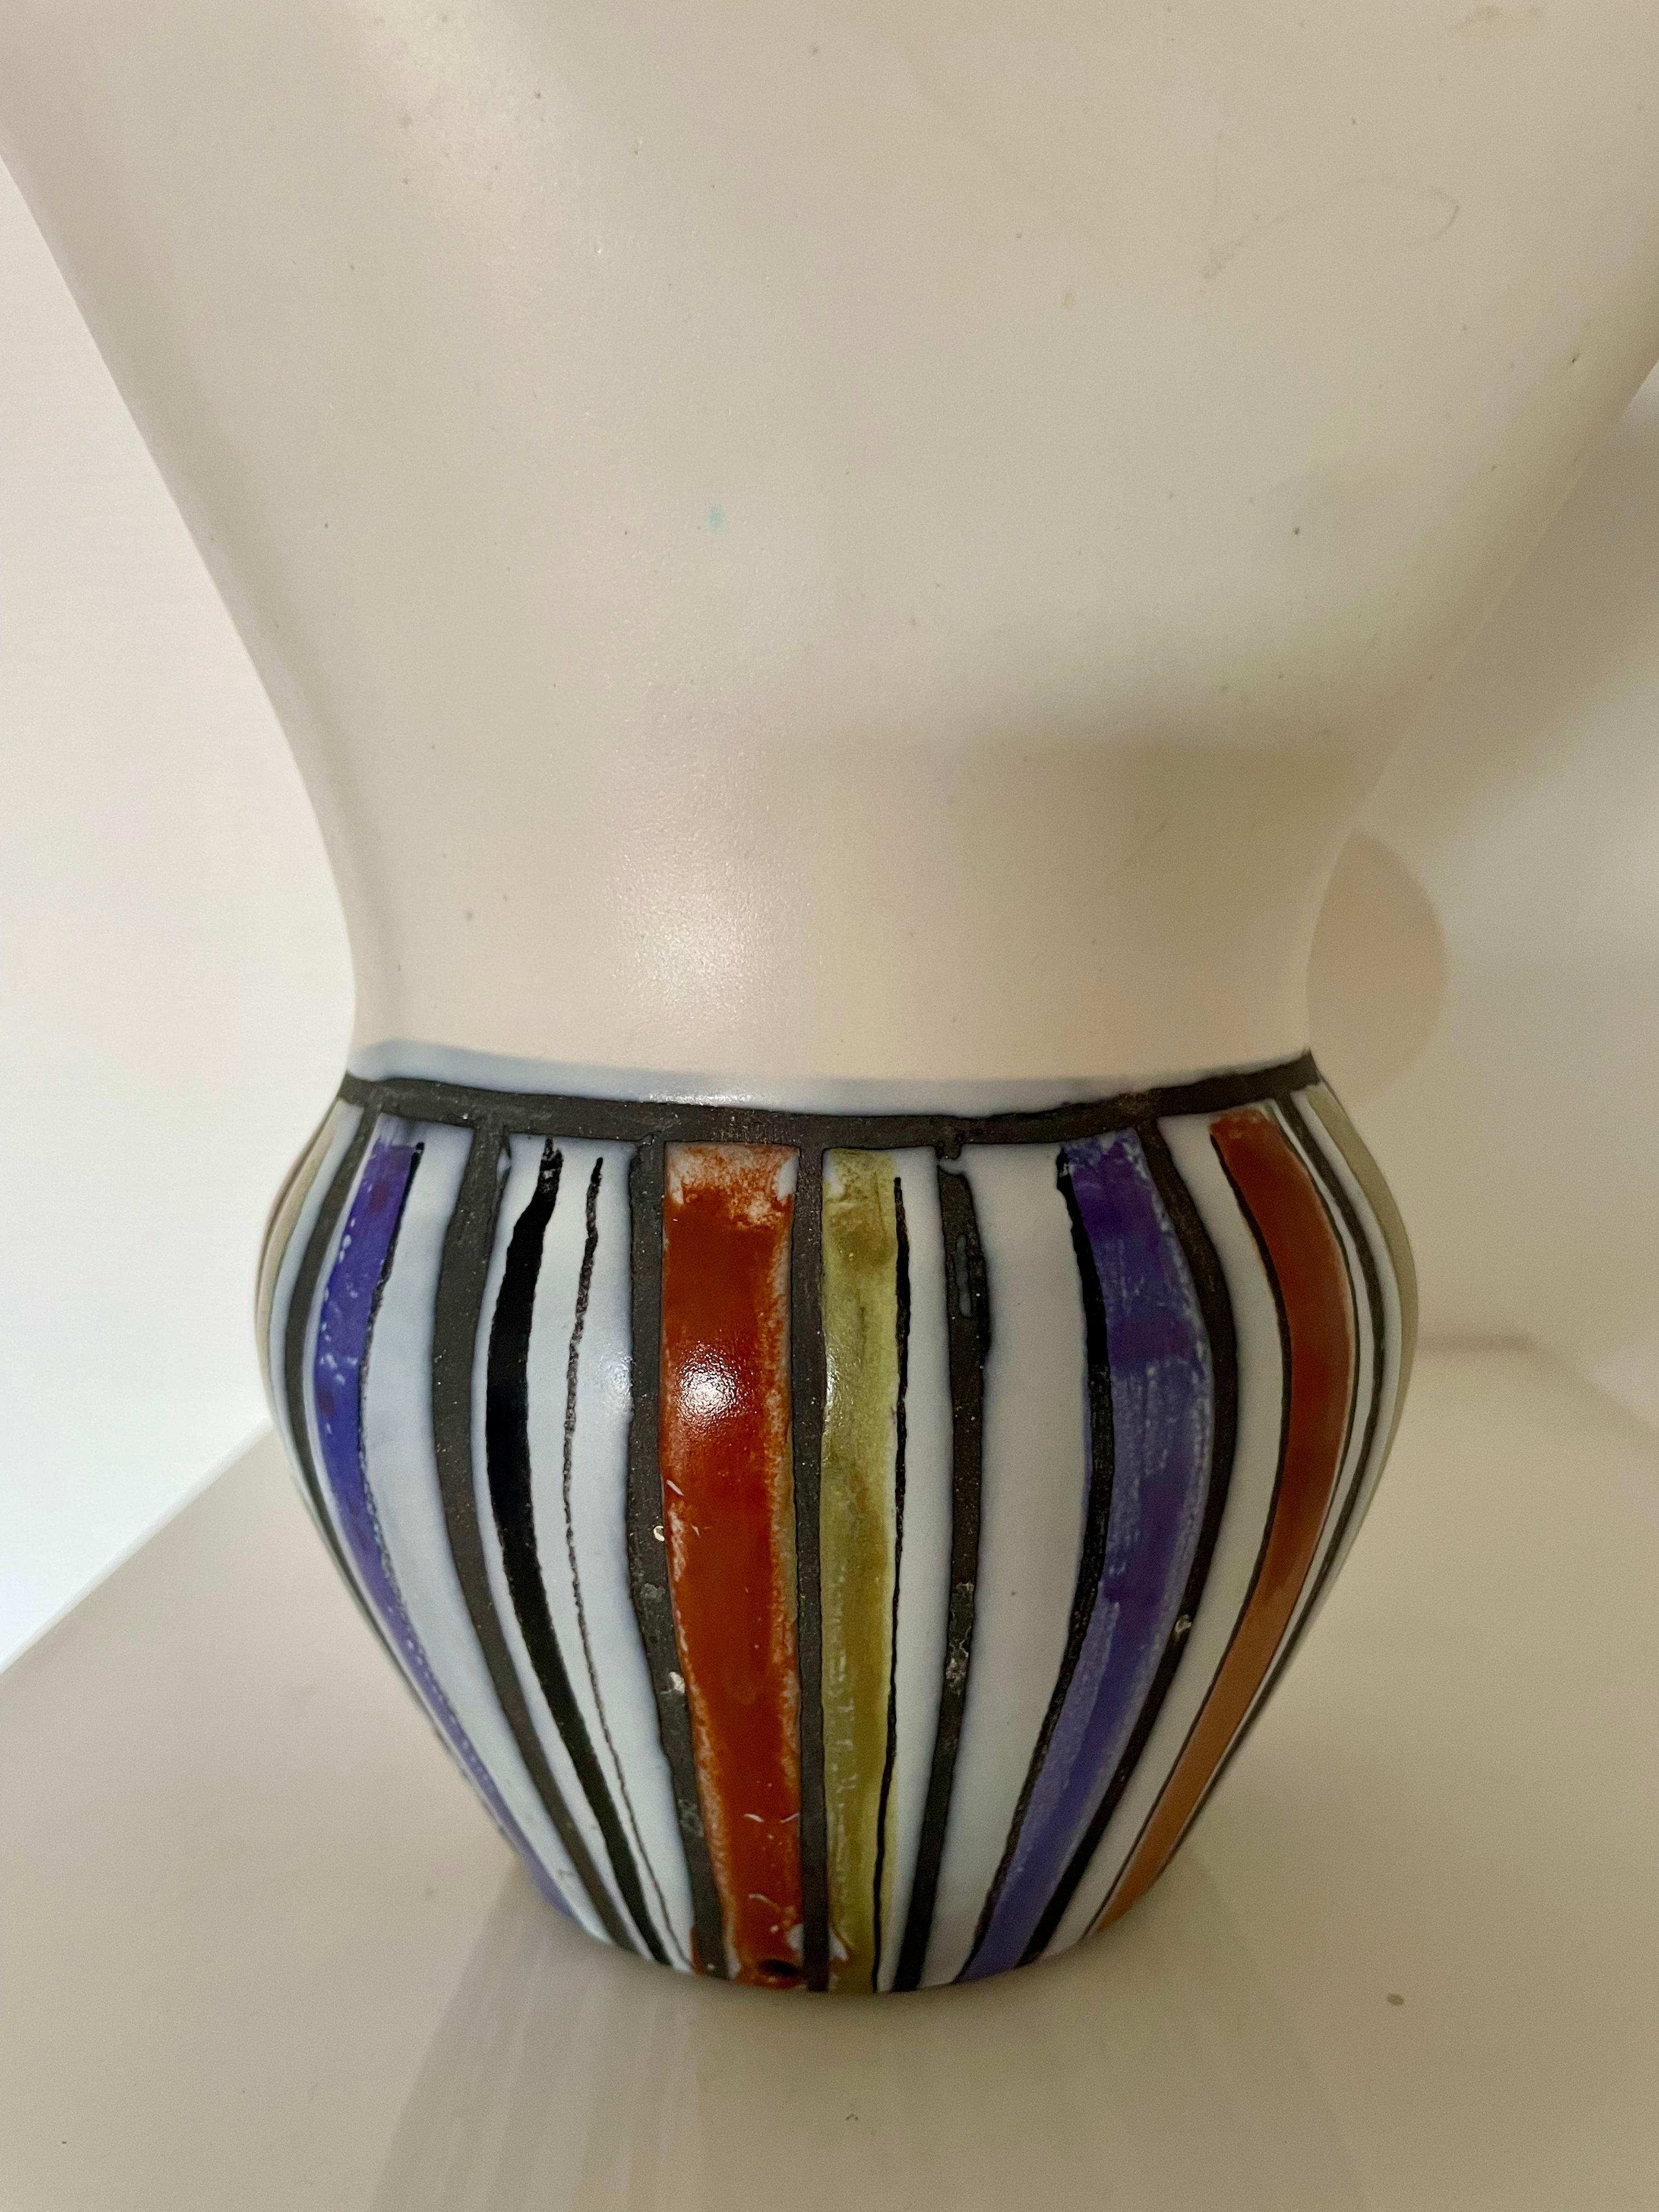 Ceramic Pitcher Vase by Roger Capron, 1950 In Good Condition For Sale In Saint-Ouen, FR